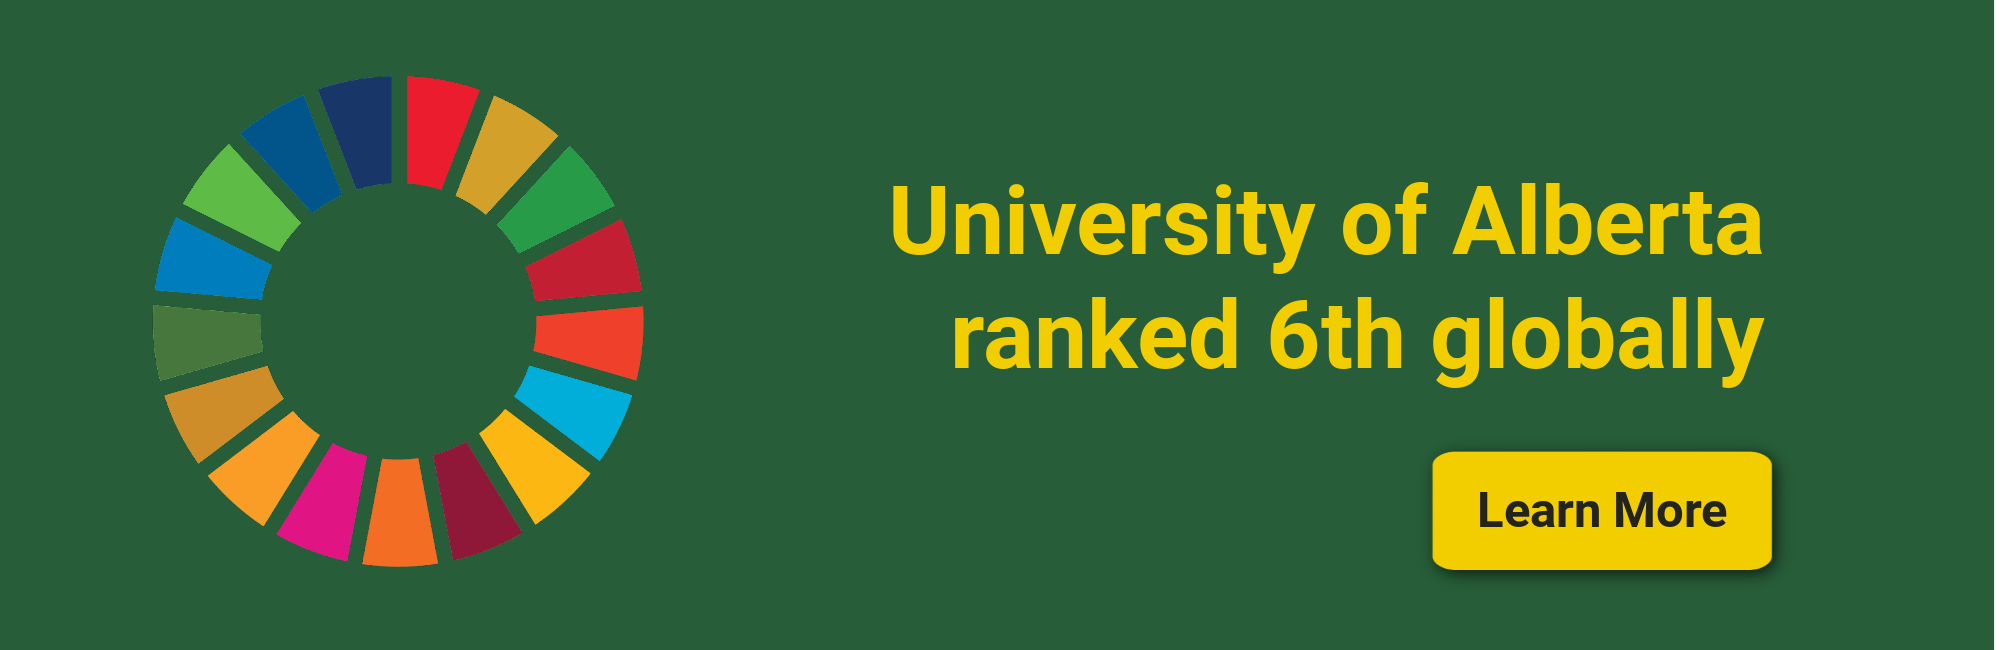 U of A ranked 6th globally - click to read more